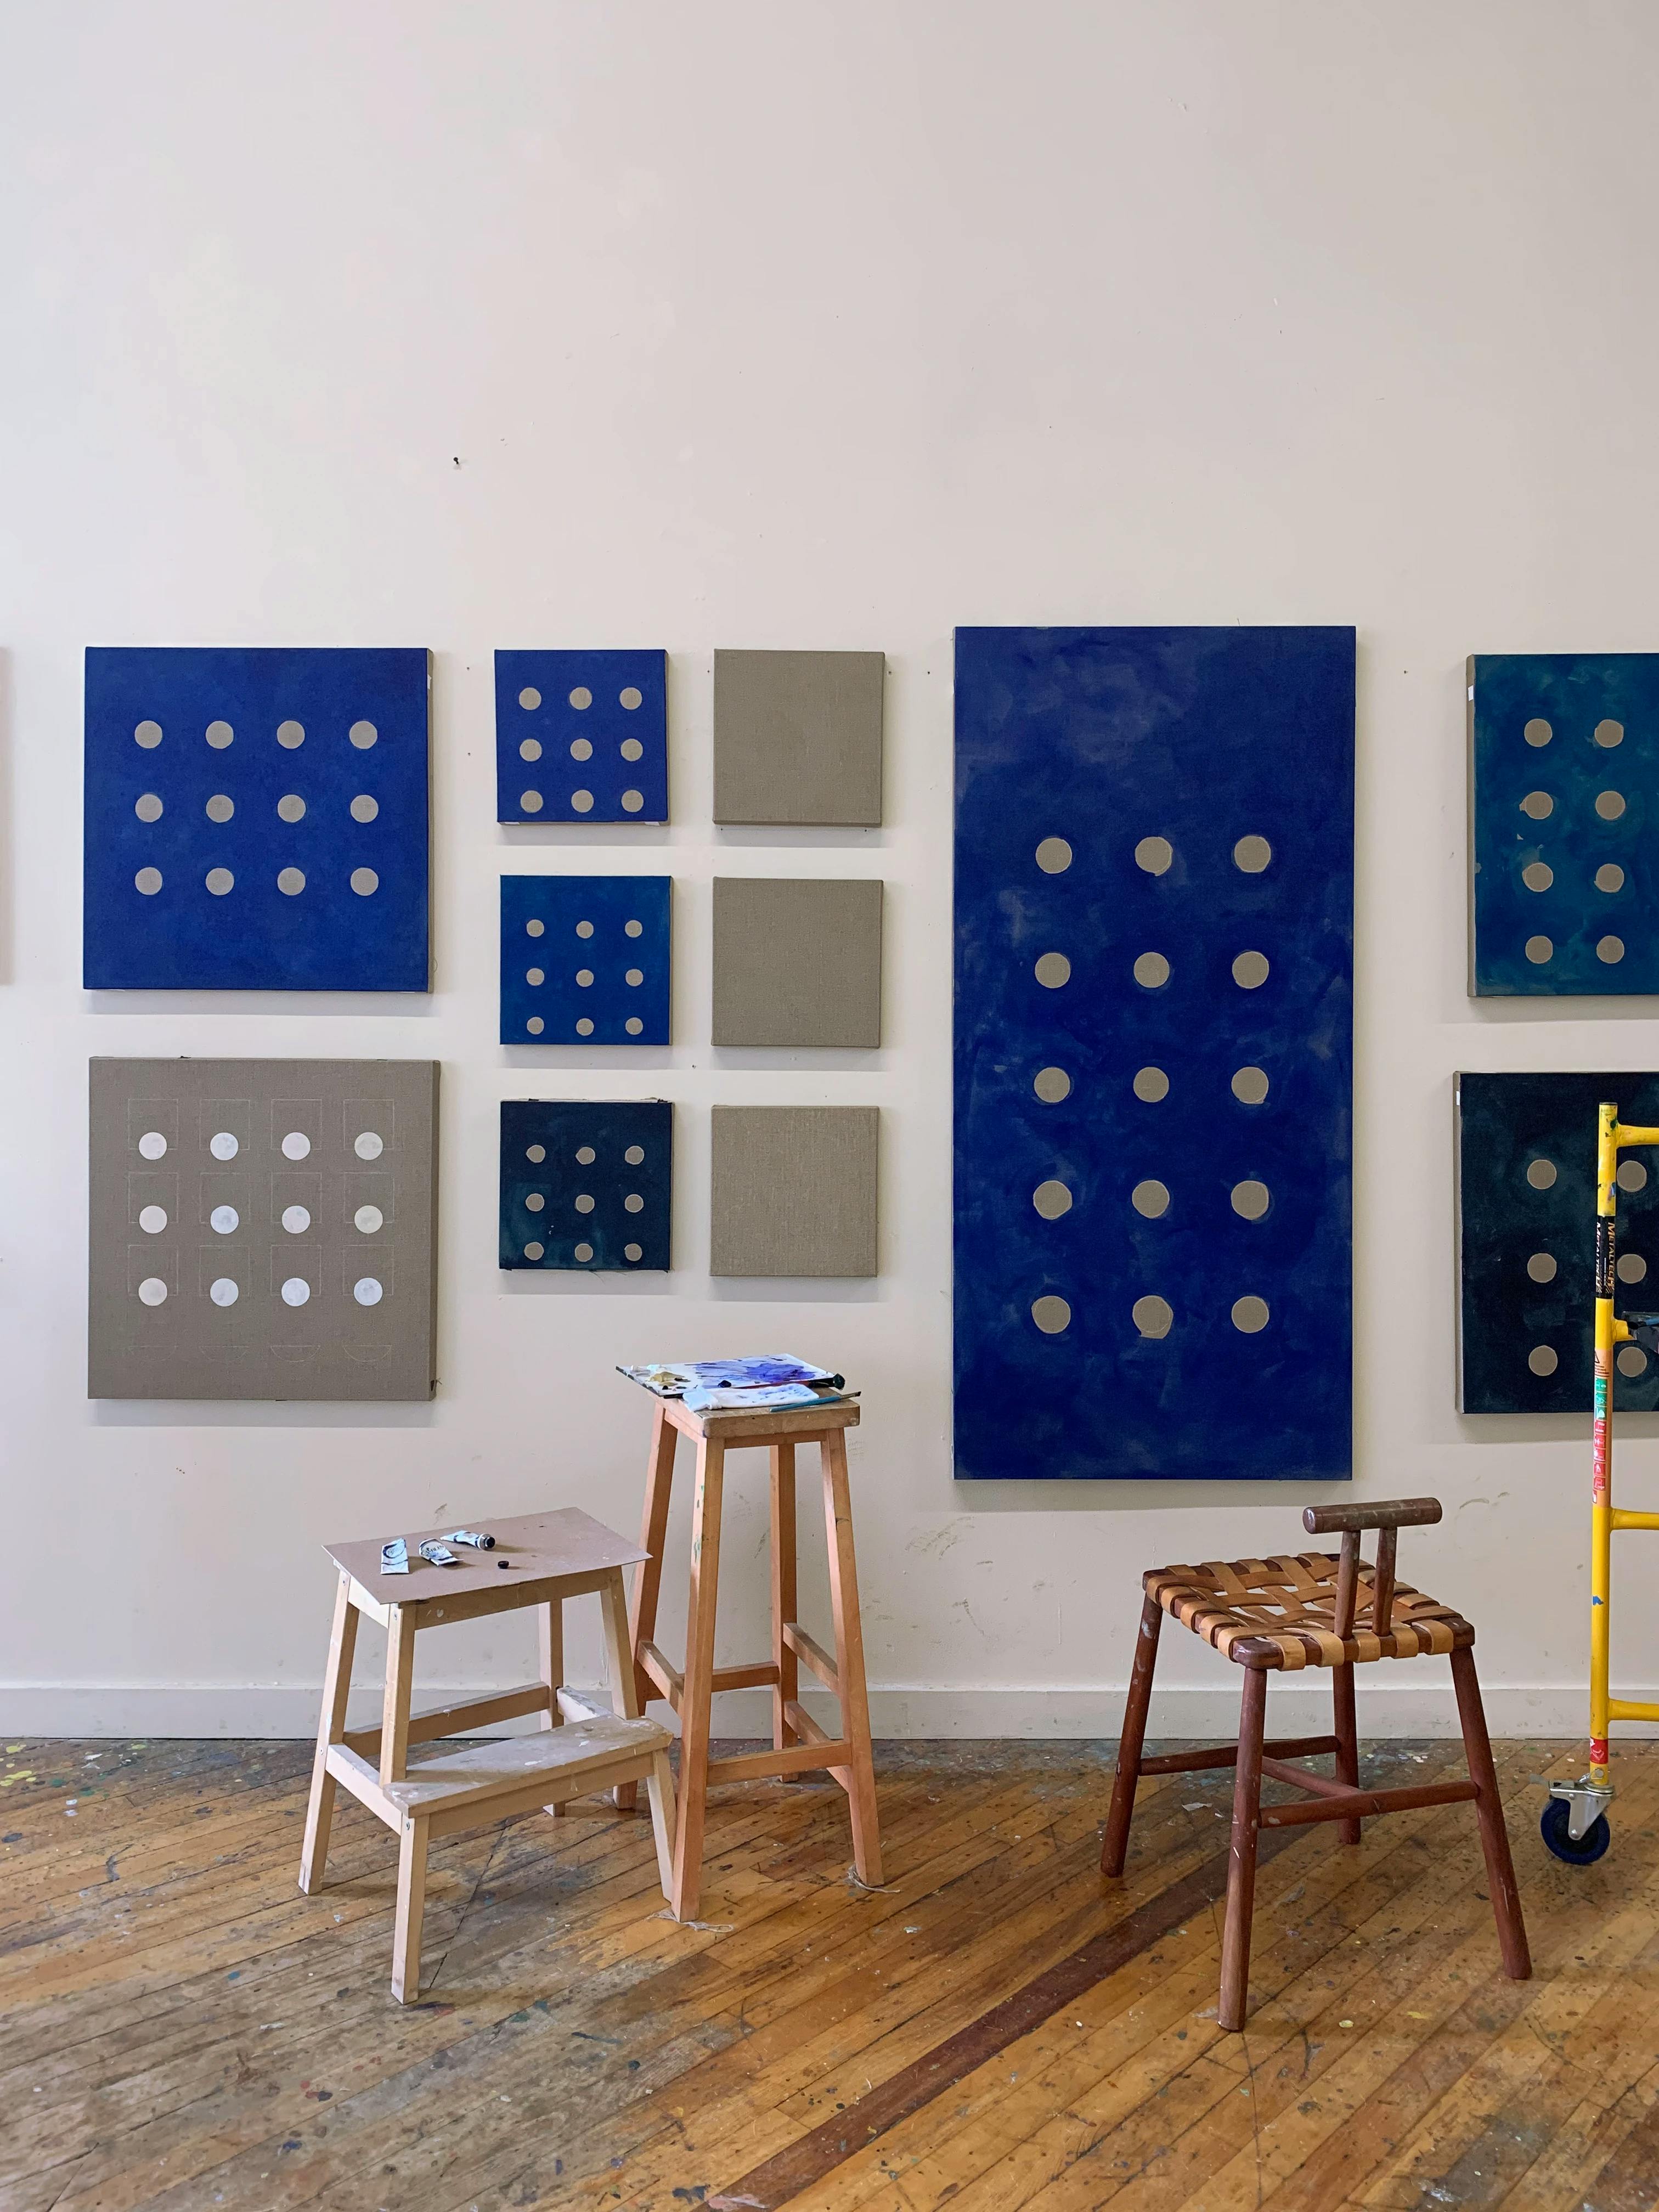 Geometric, gray and blue paintings on canvas by artist Carla Weeks.